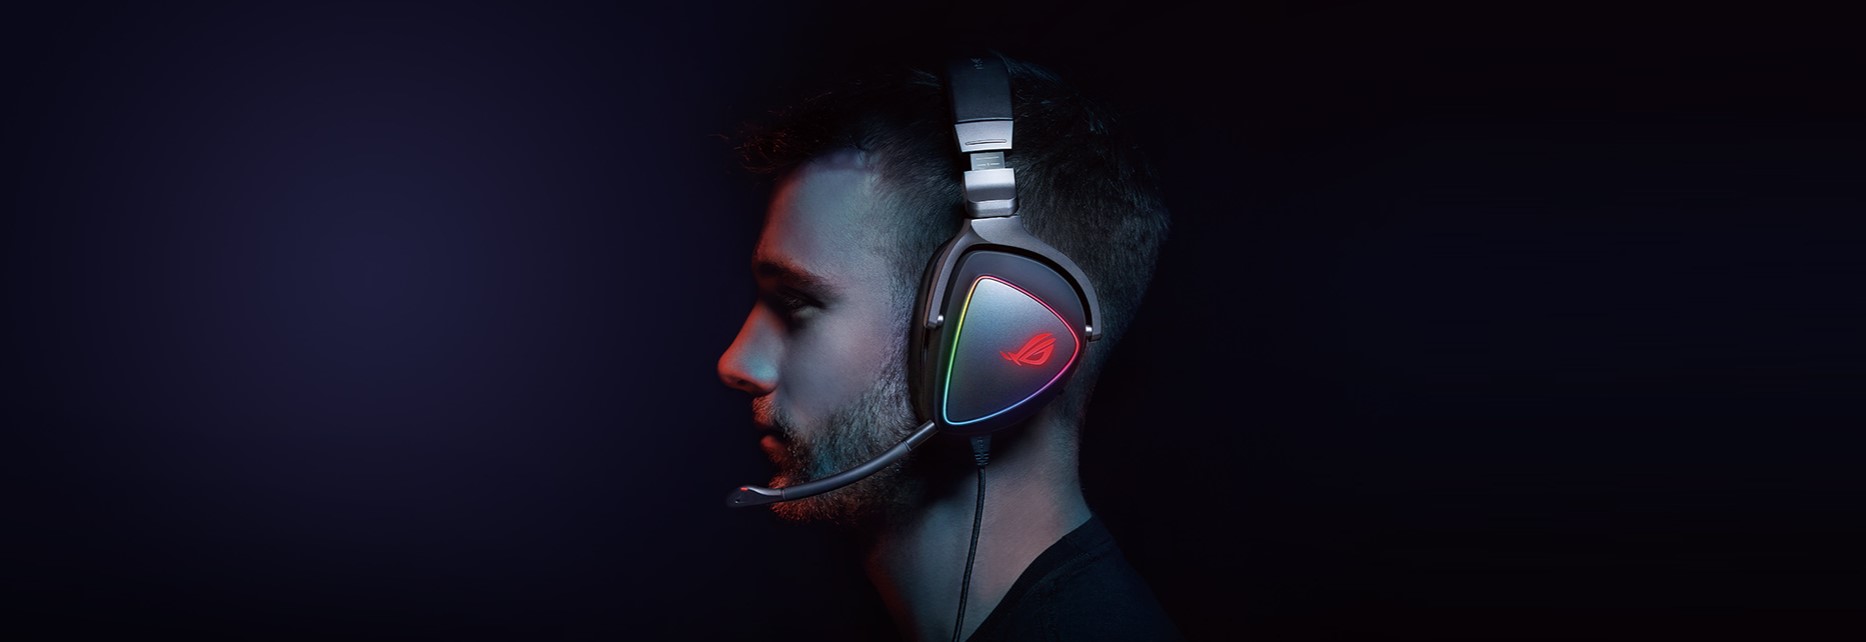 Asus_ROG_Delta_RGB_Wired_Gaming_Headset_sold_by_Technomobi